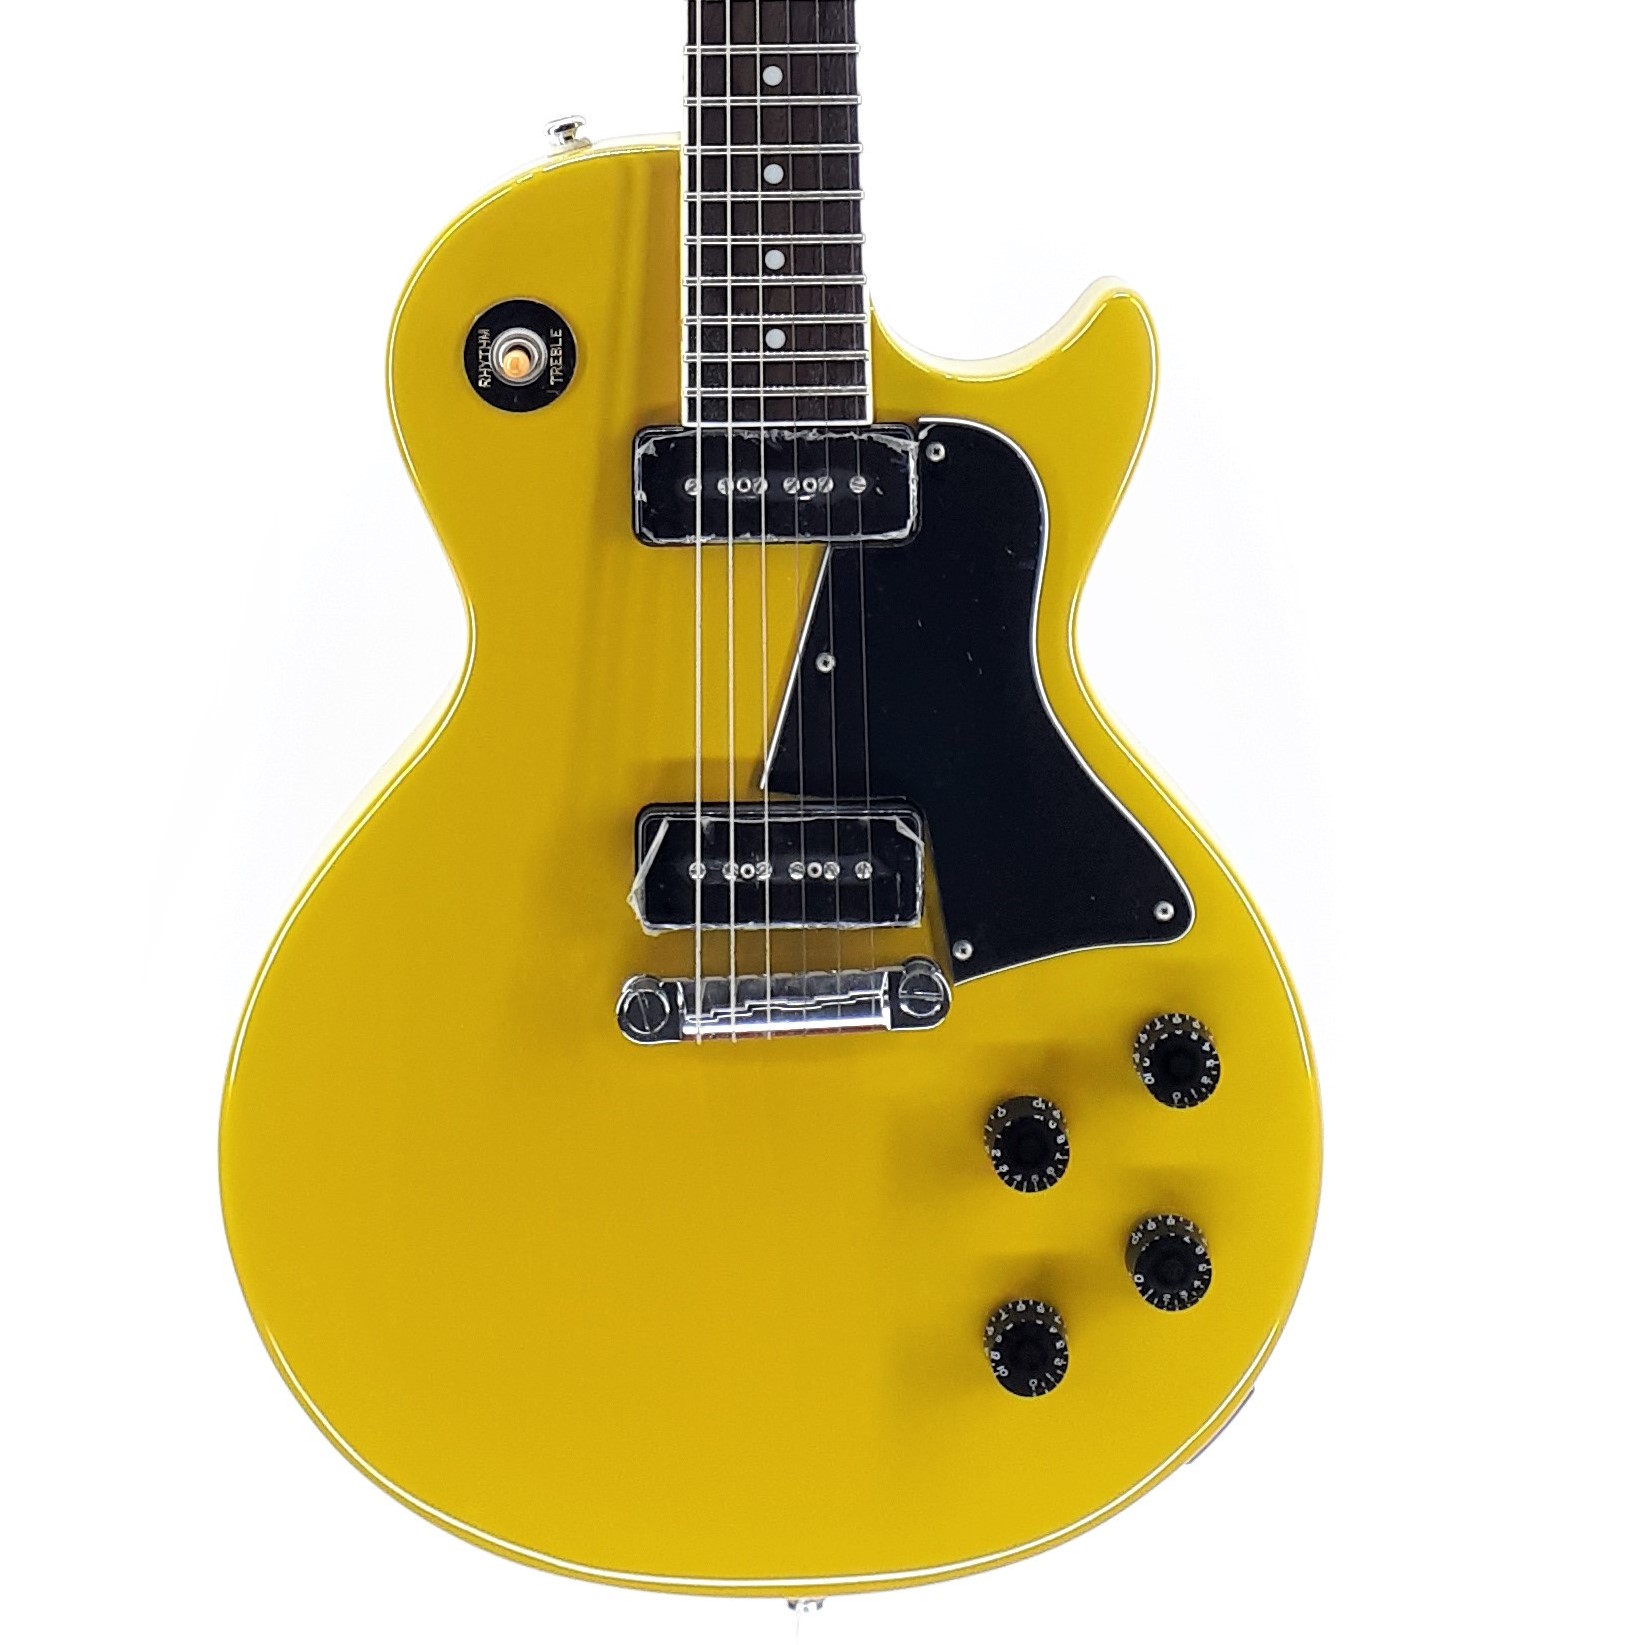 Tokai LSS-54 Les Paul Specialギターセット - ギター